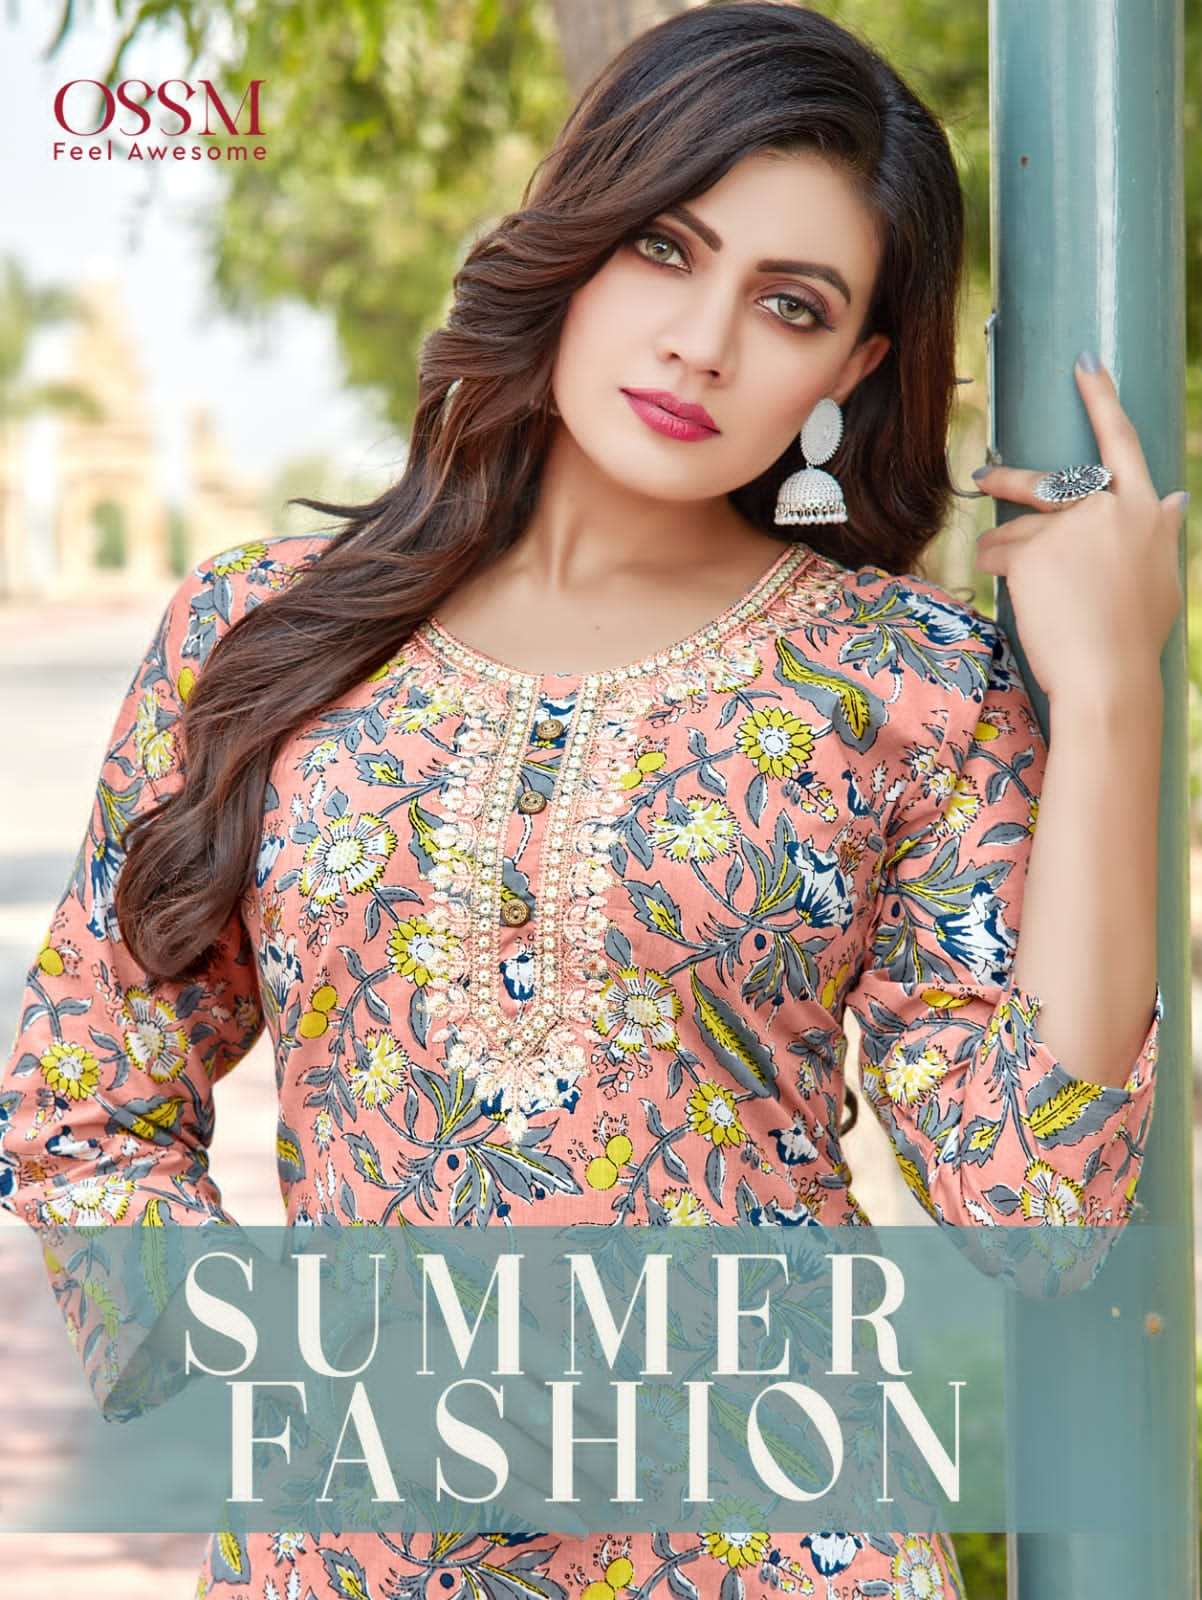 SUMMER FASHION BY OSSM NEW HEAVY FANCY DESIGNER COTTON PRINTED KURTI COLLECTION WHOLESALER